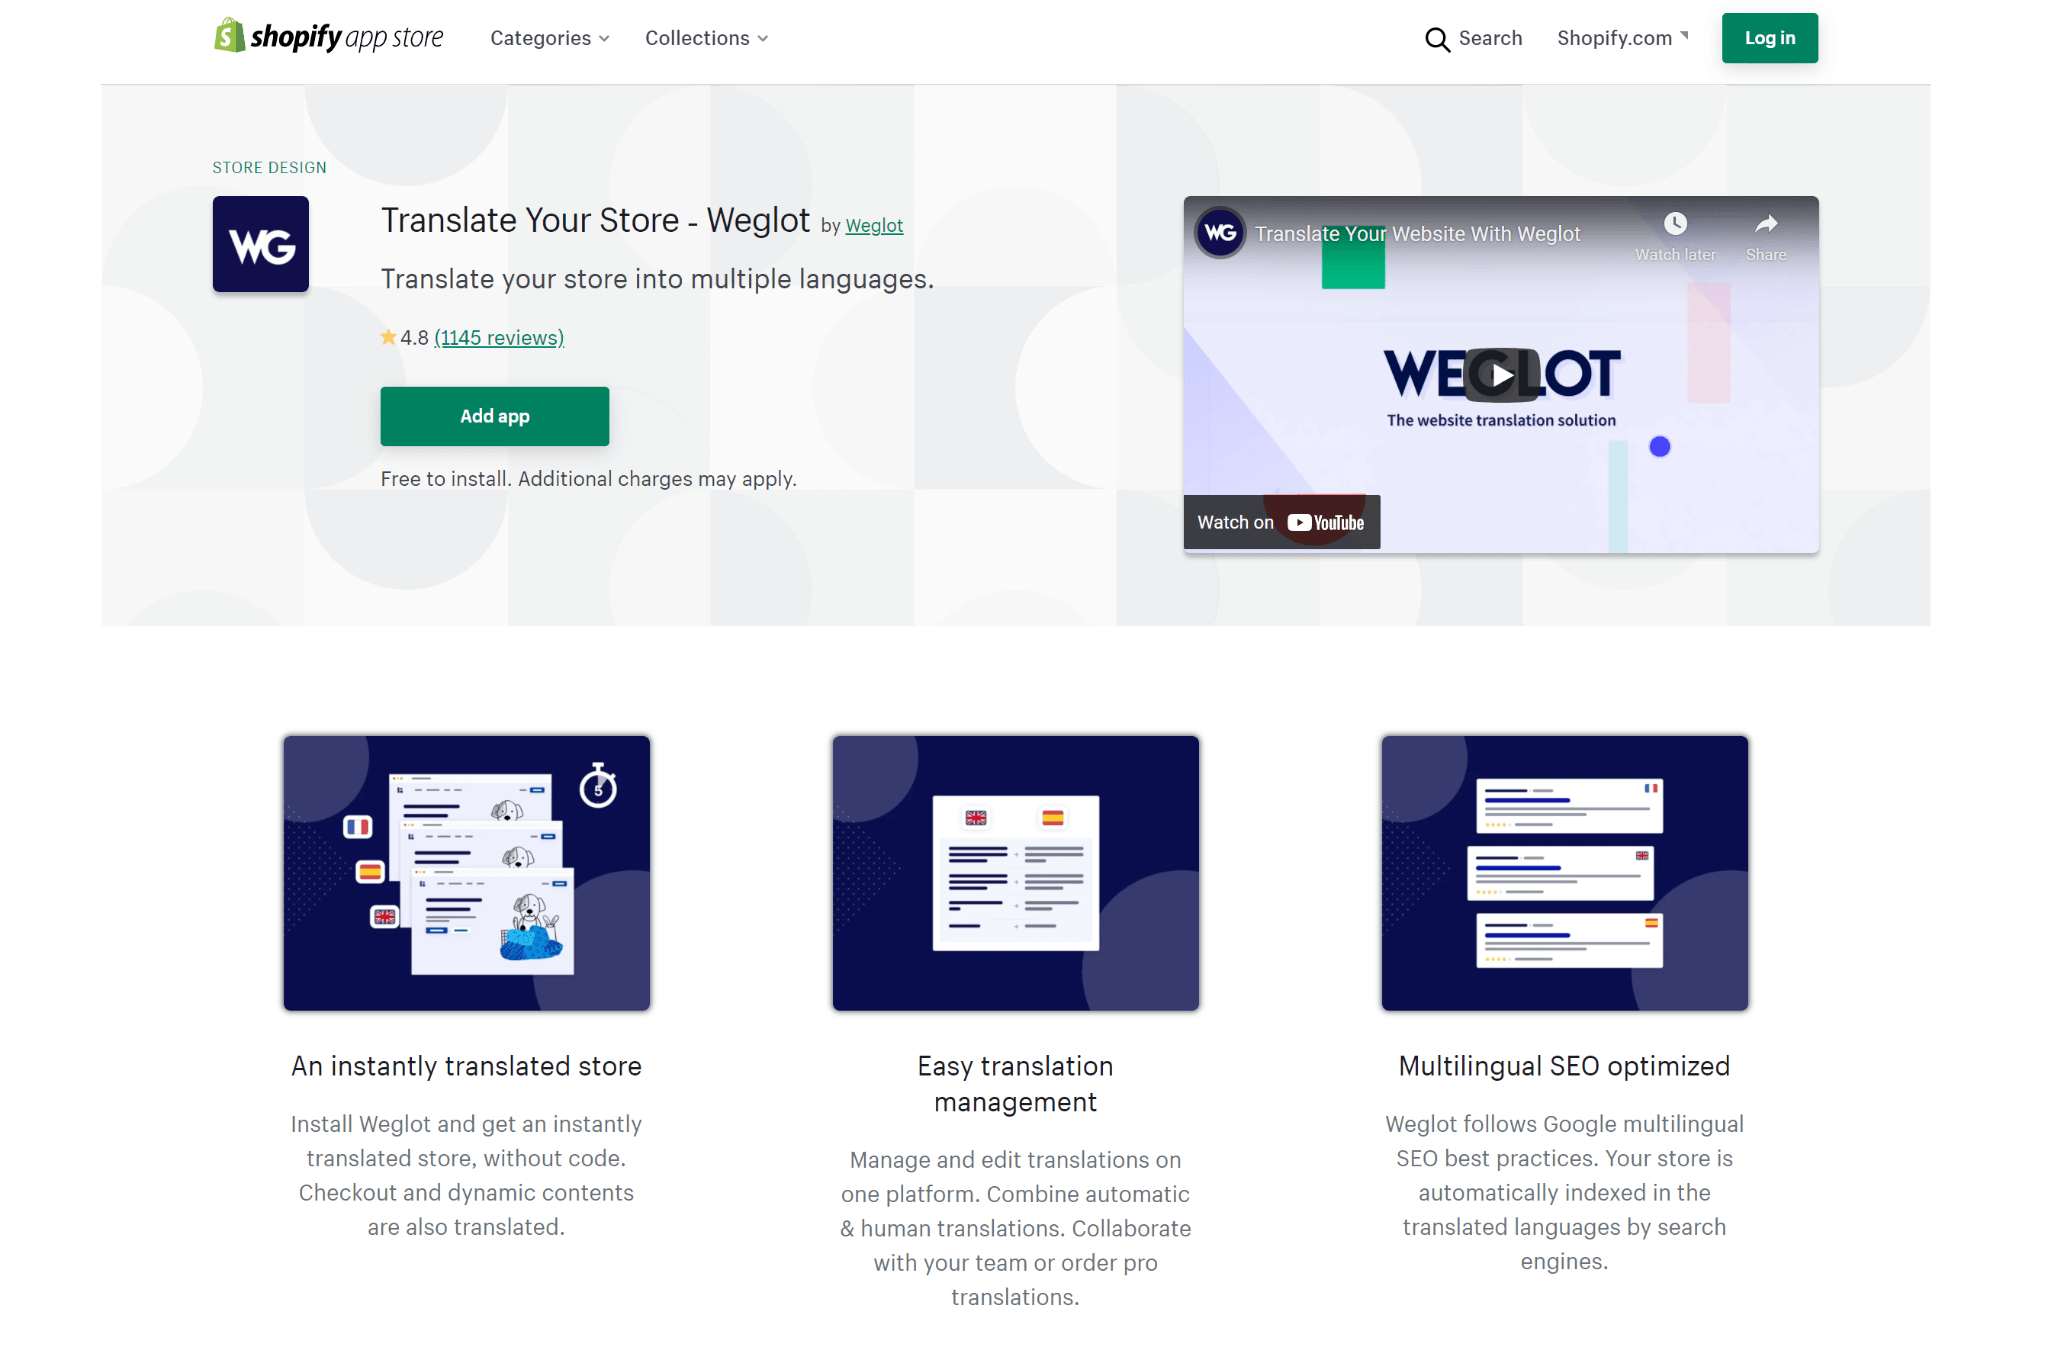 A screenshot of the Weglot app available on the Shopify app store 